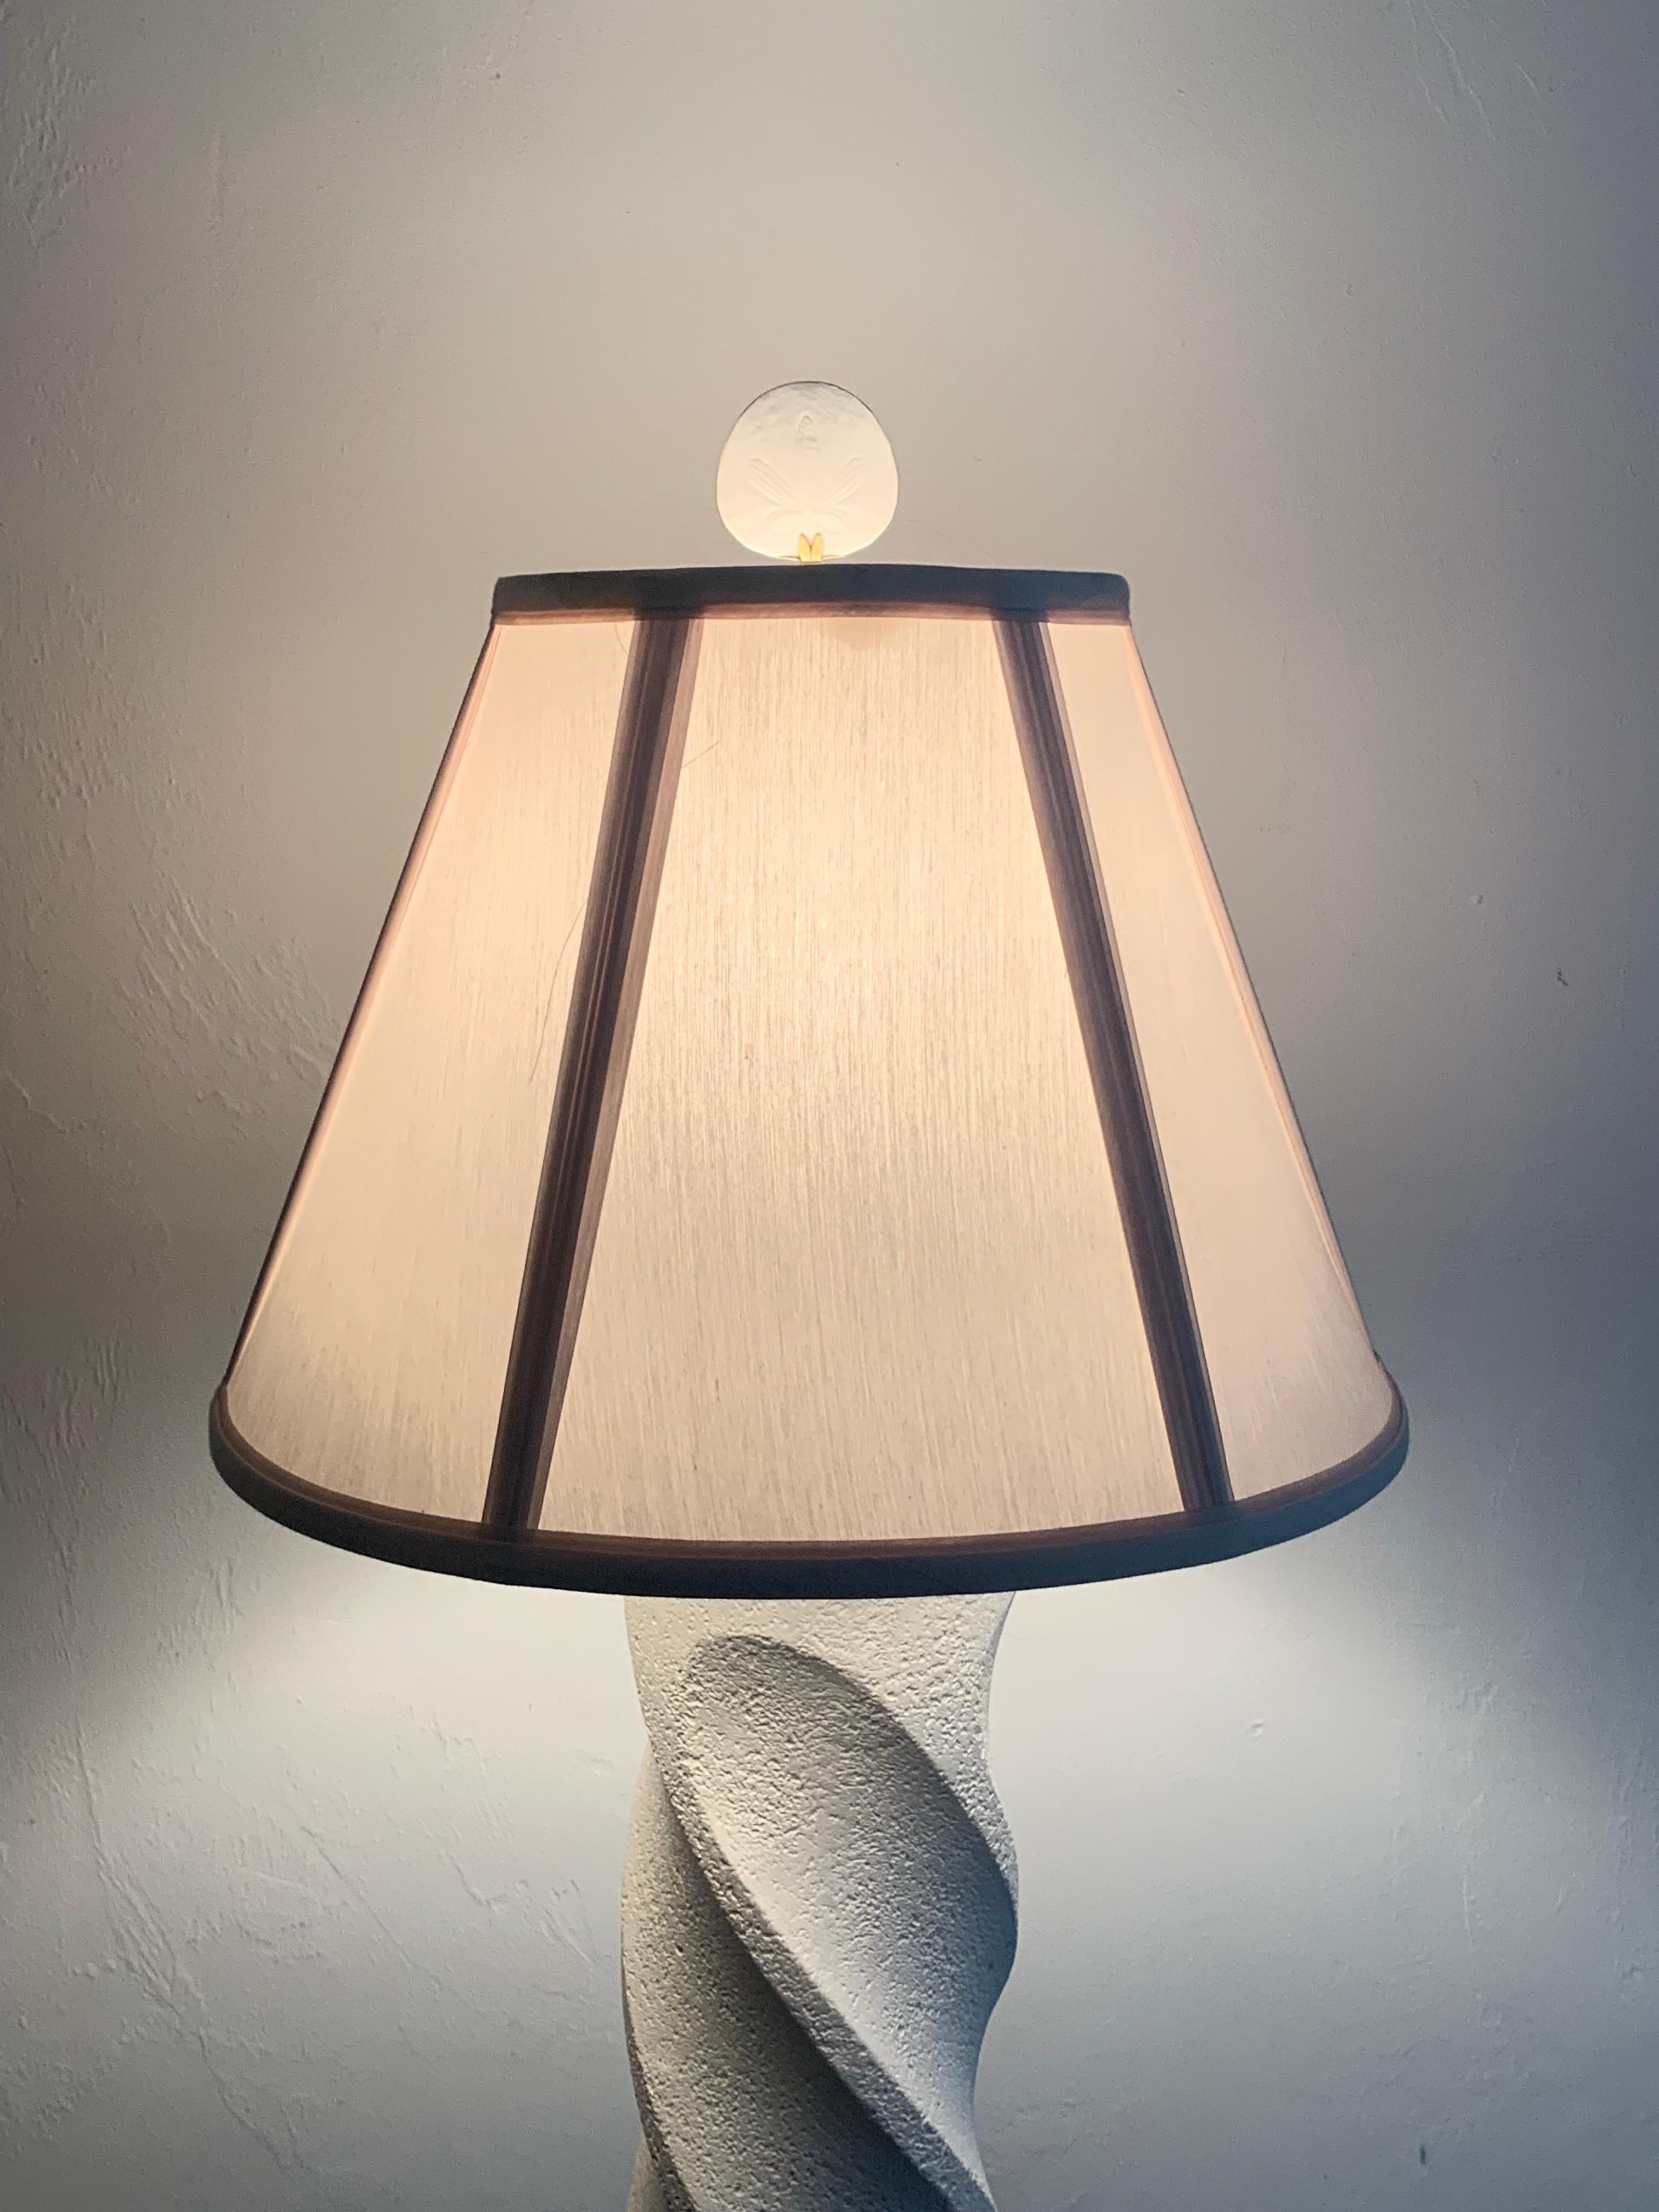 A plaster floor lamp in the style of Michael Taylor featuring a spiral column design with a circular base. The textured plaster offers an organic elegance reminiscent of white washed stone or unfilled travertine. Has a sand dollar finial. USA, 1990s.